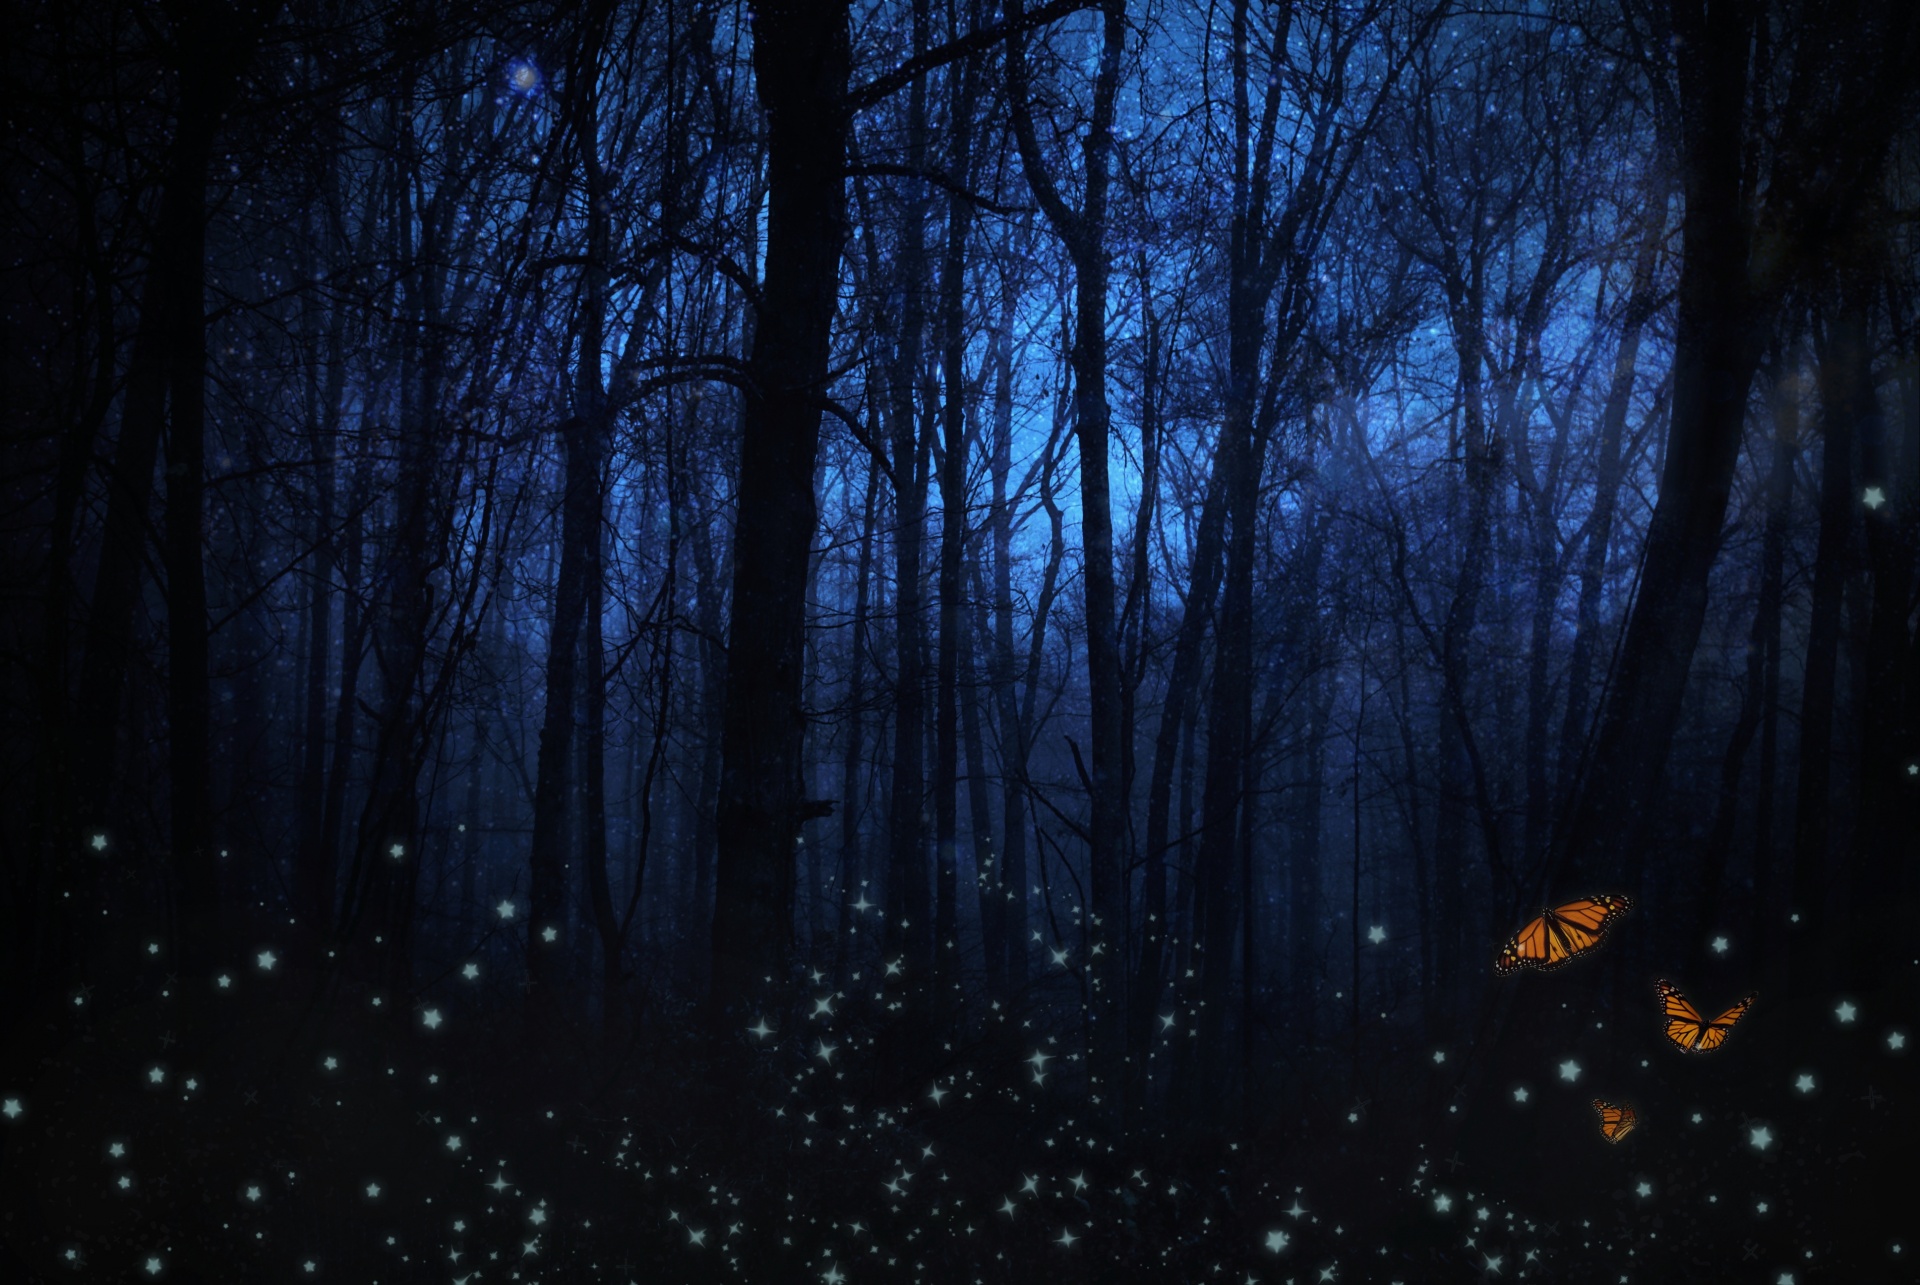 Night Forest Fairy Mystical Background Free Image From Needpix Com